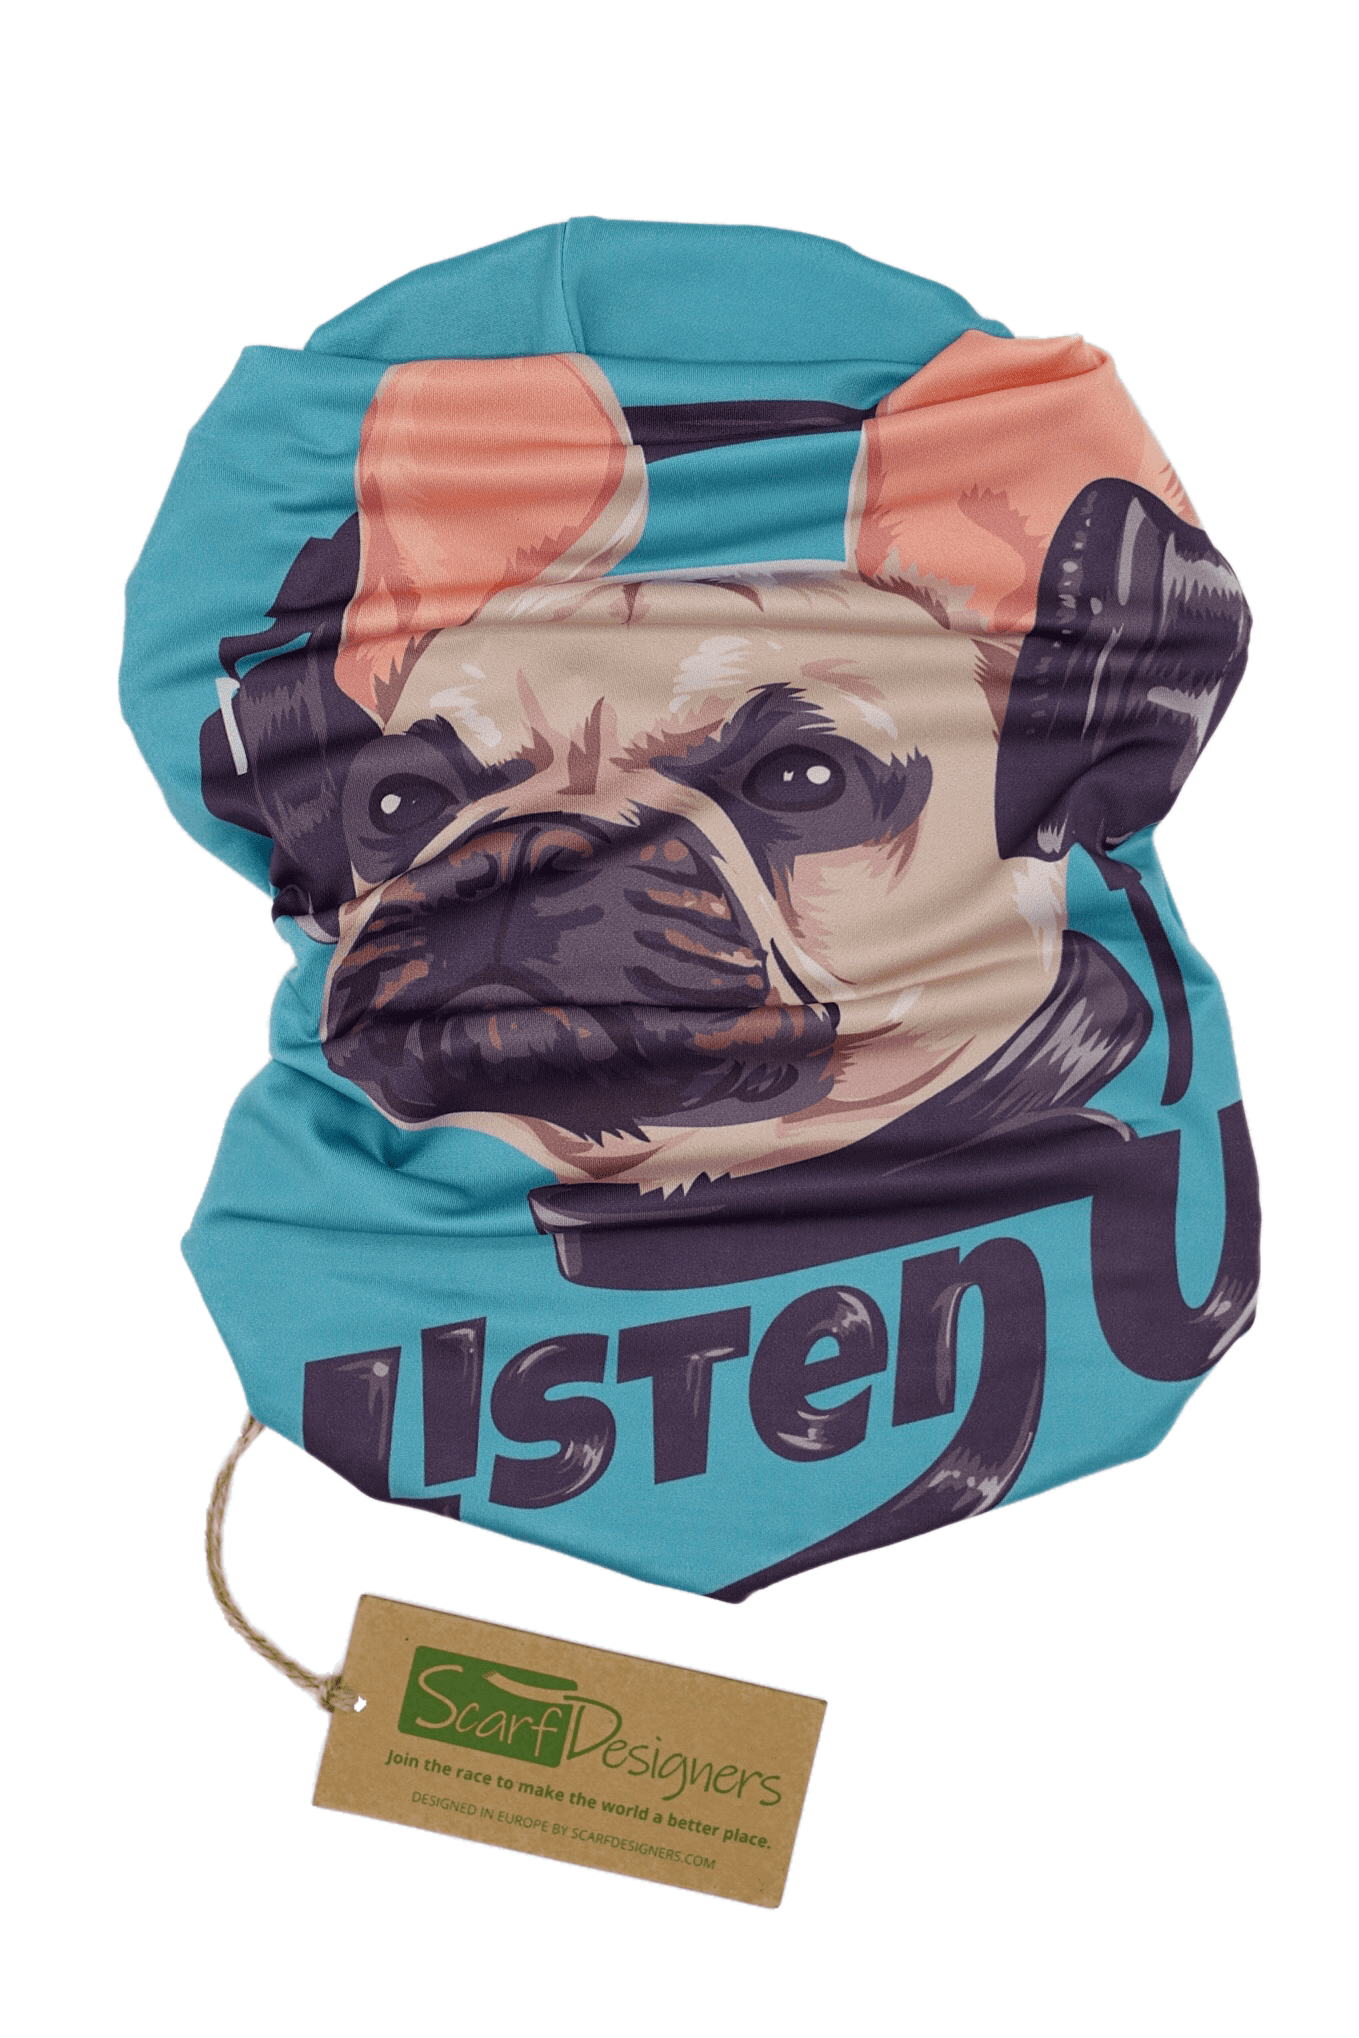 This is a unisex, multifunctional and sustainable bandana with a French Bulldog print in blue. It is made from recycled polyester which is breathable, durable, soft to touch, easy to care and fast drying material. It makes it perfectly suitable for all kinds of sports like biking, hiking, jogging or skiing. This is a versatile bandana that can be used as a scarf, face mask, bandana or headband and it is also known as tube scarf, neck gaiter or face mask. It is a vegan product certified by PETA.